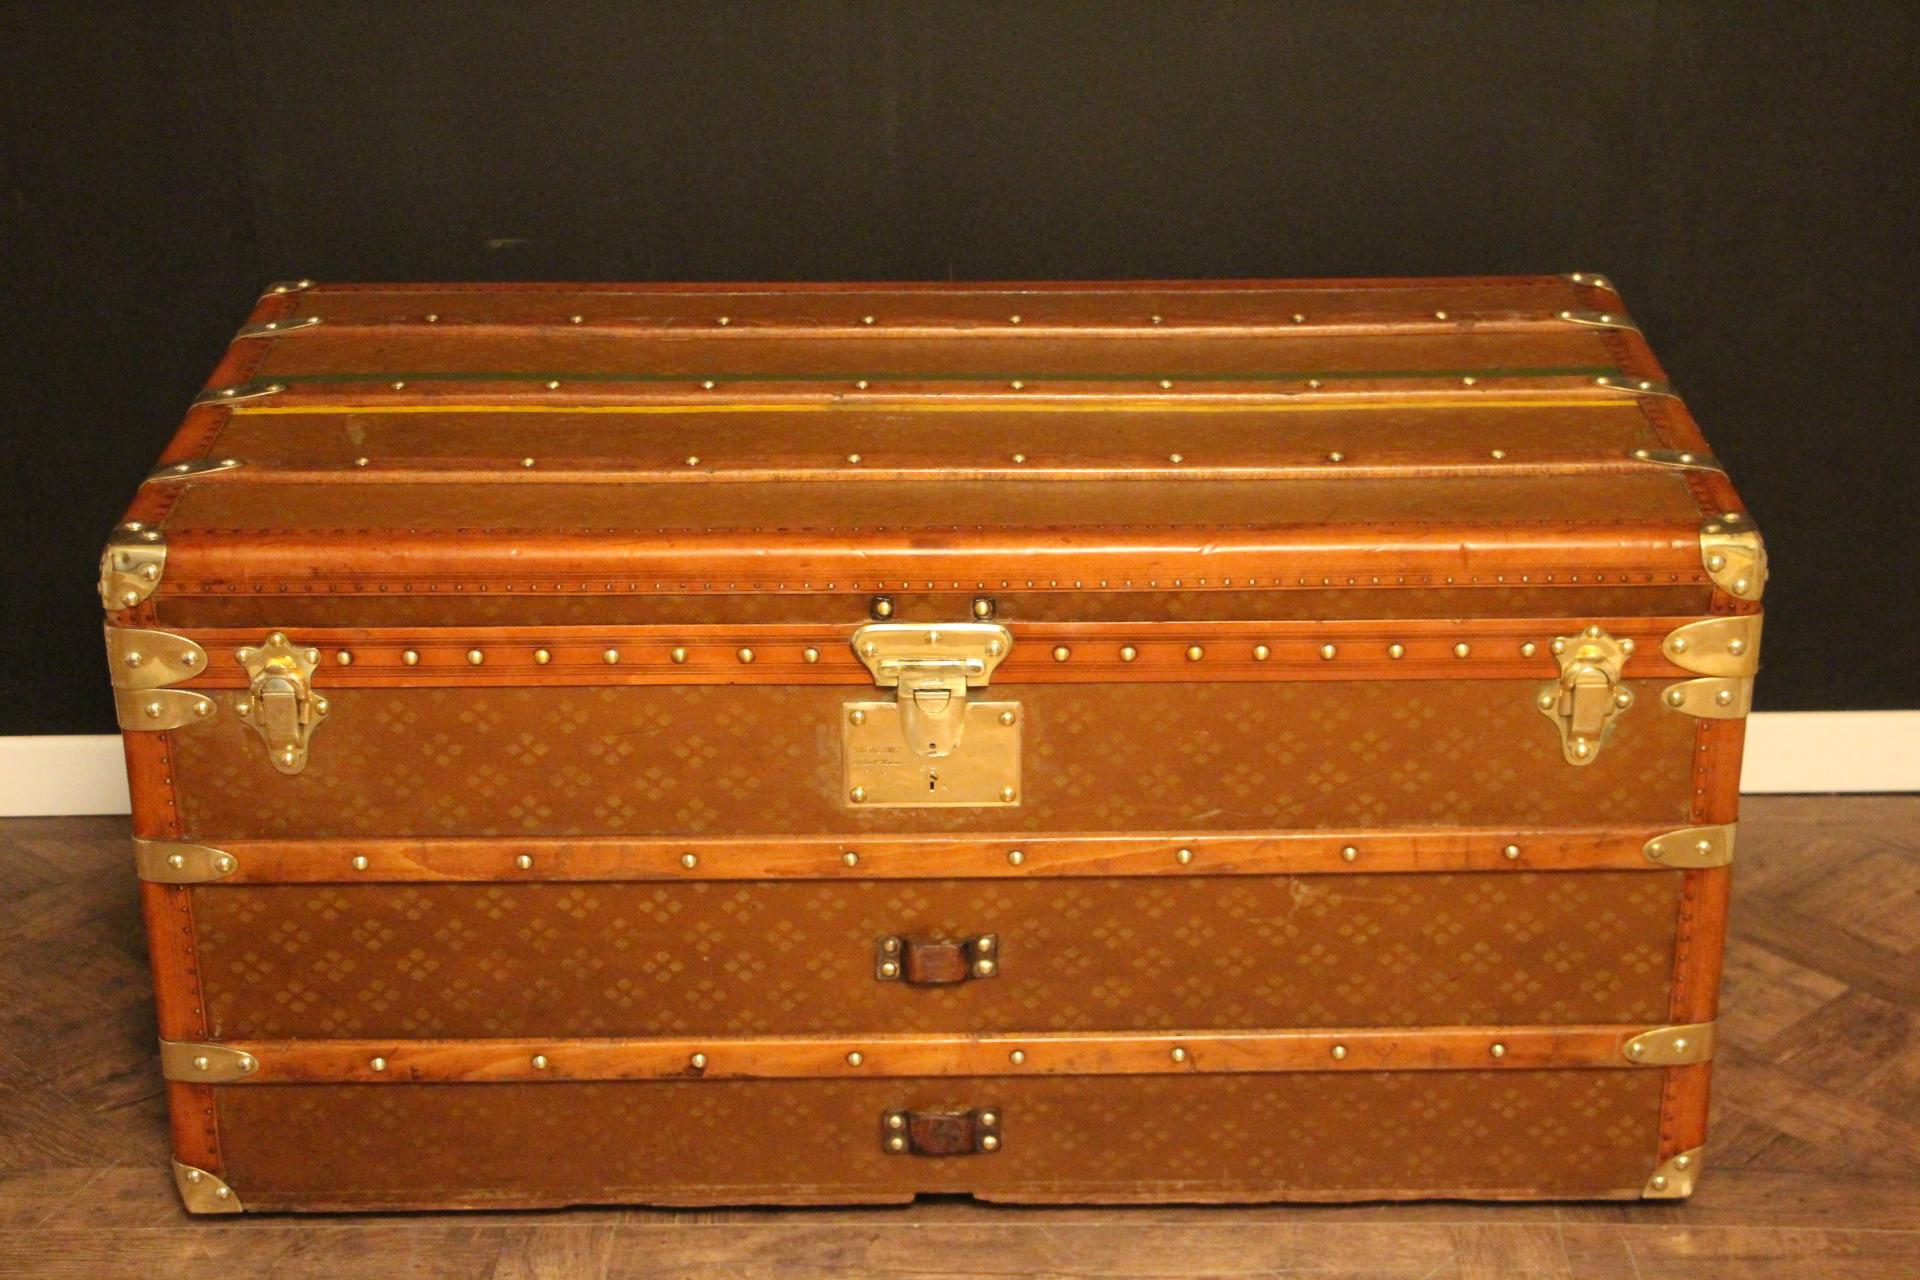 This beautiful French luxury steamer trunk features the specific 